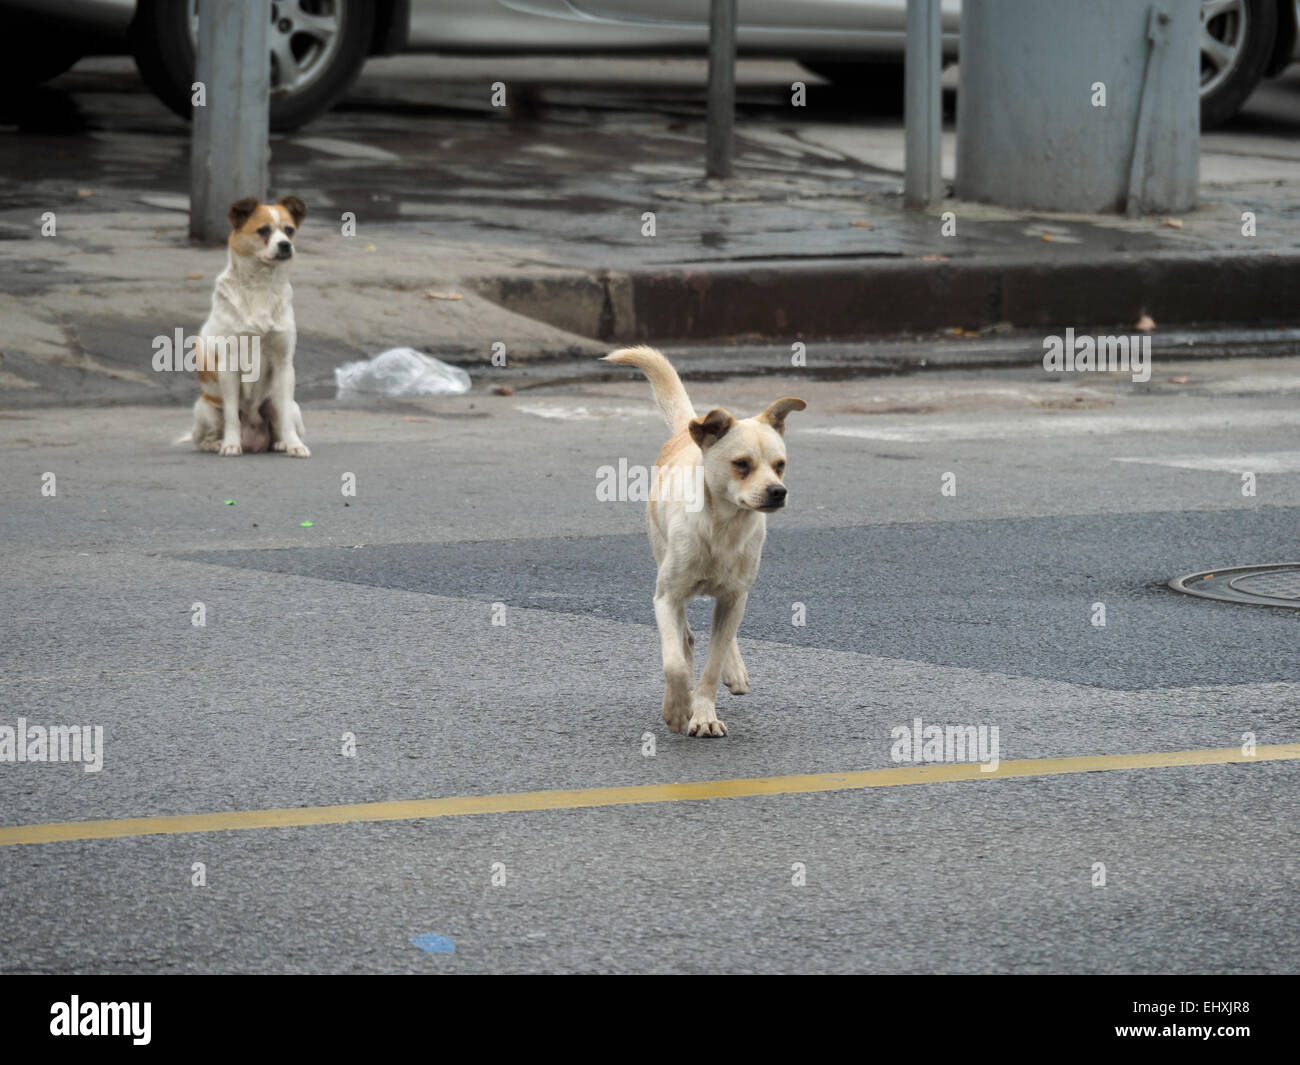 Two stray dogs on the streets of a city Stock Photo